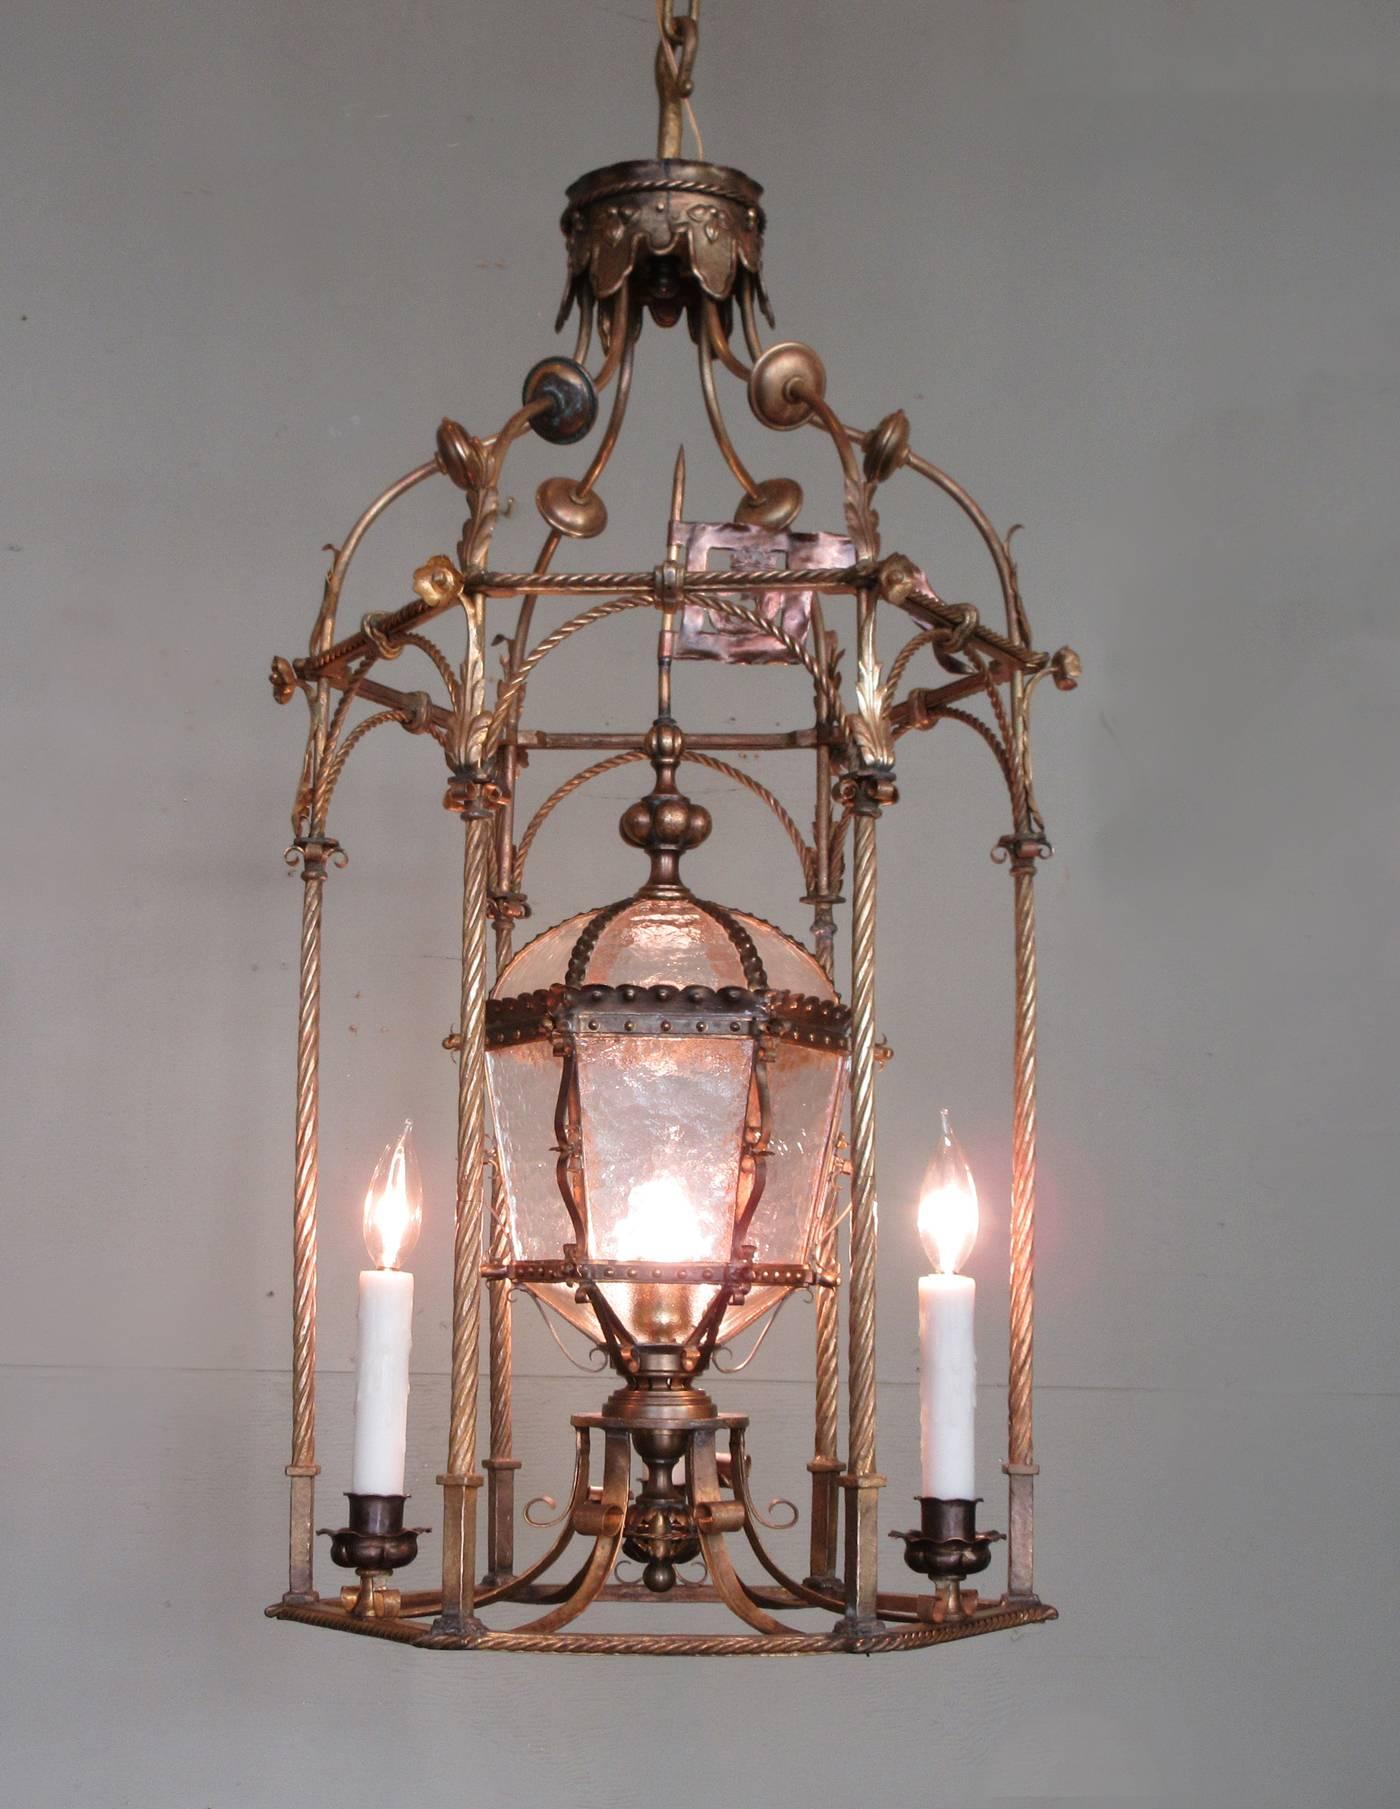 A grand Venetian gilt tole lantern, circa 1840, featuring three candles and original centre oil lamp accented with tole and brass flag. The lantern has been cleaned and rewired with new porcelain sockets.  
  